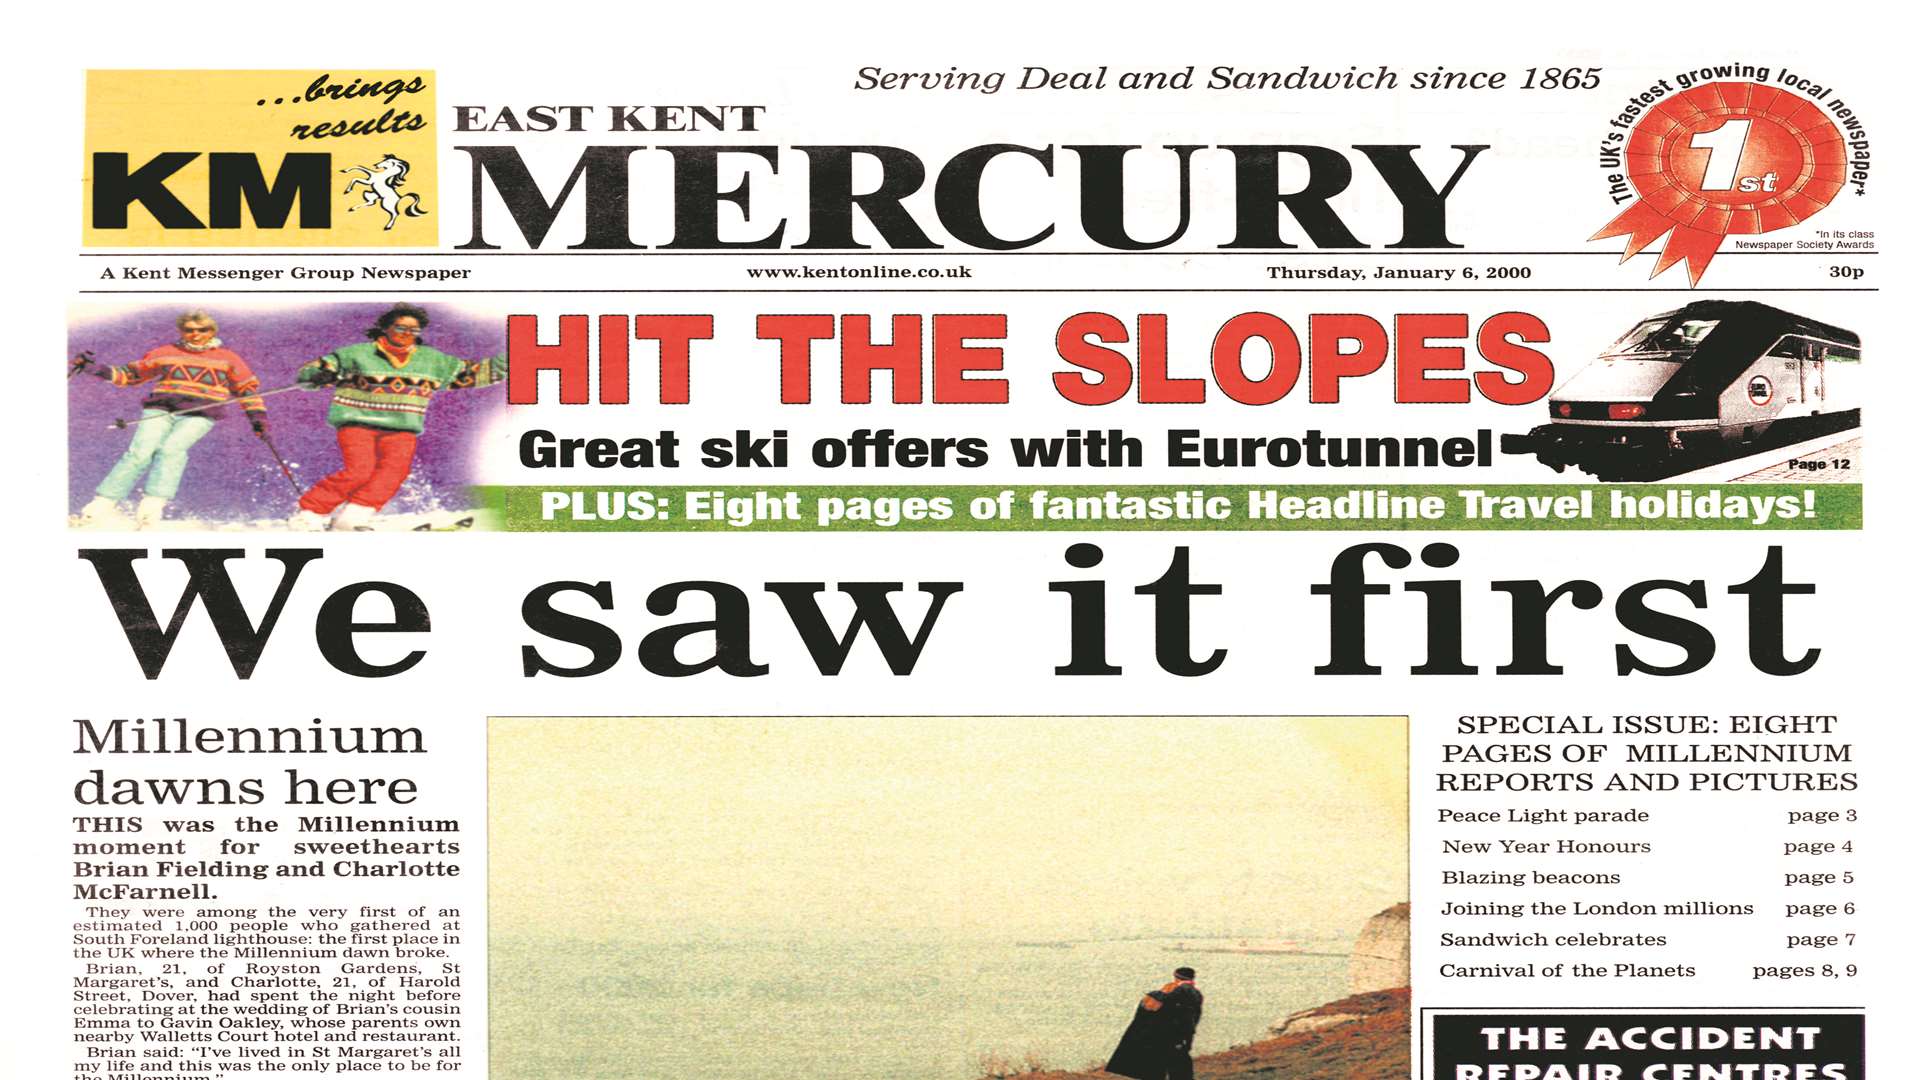 January 6, 2000 - the first Mercury of the new Millennium